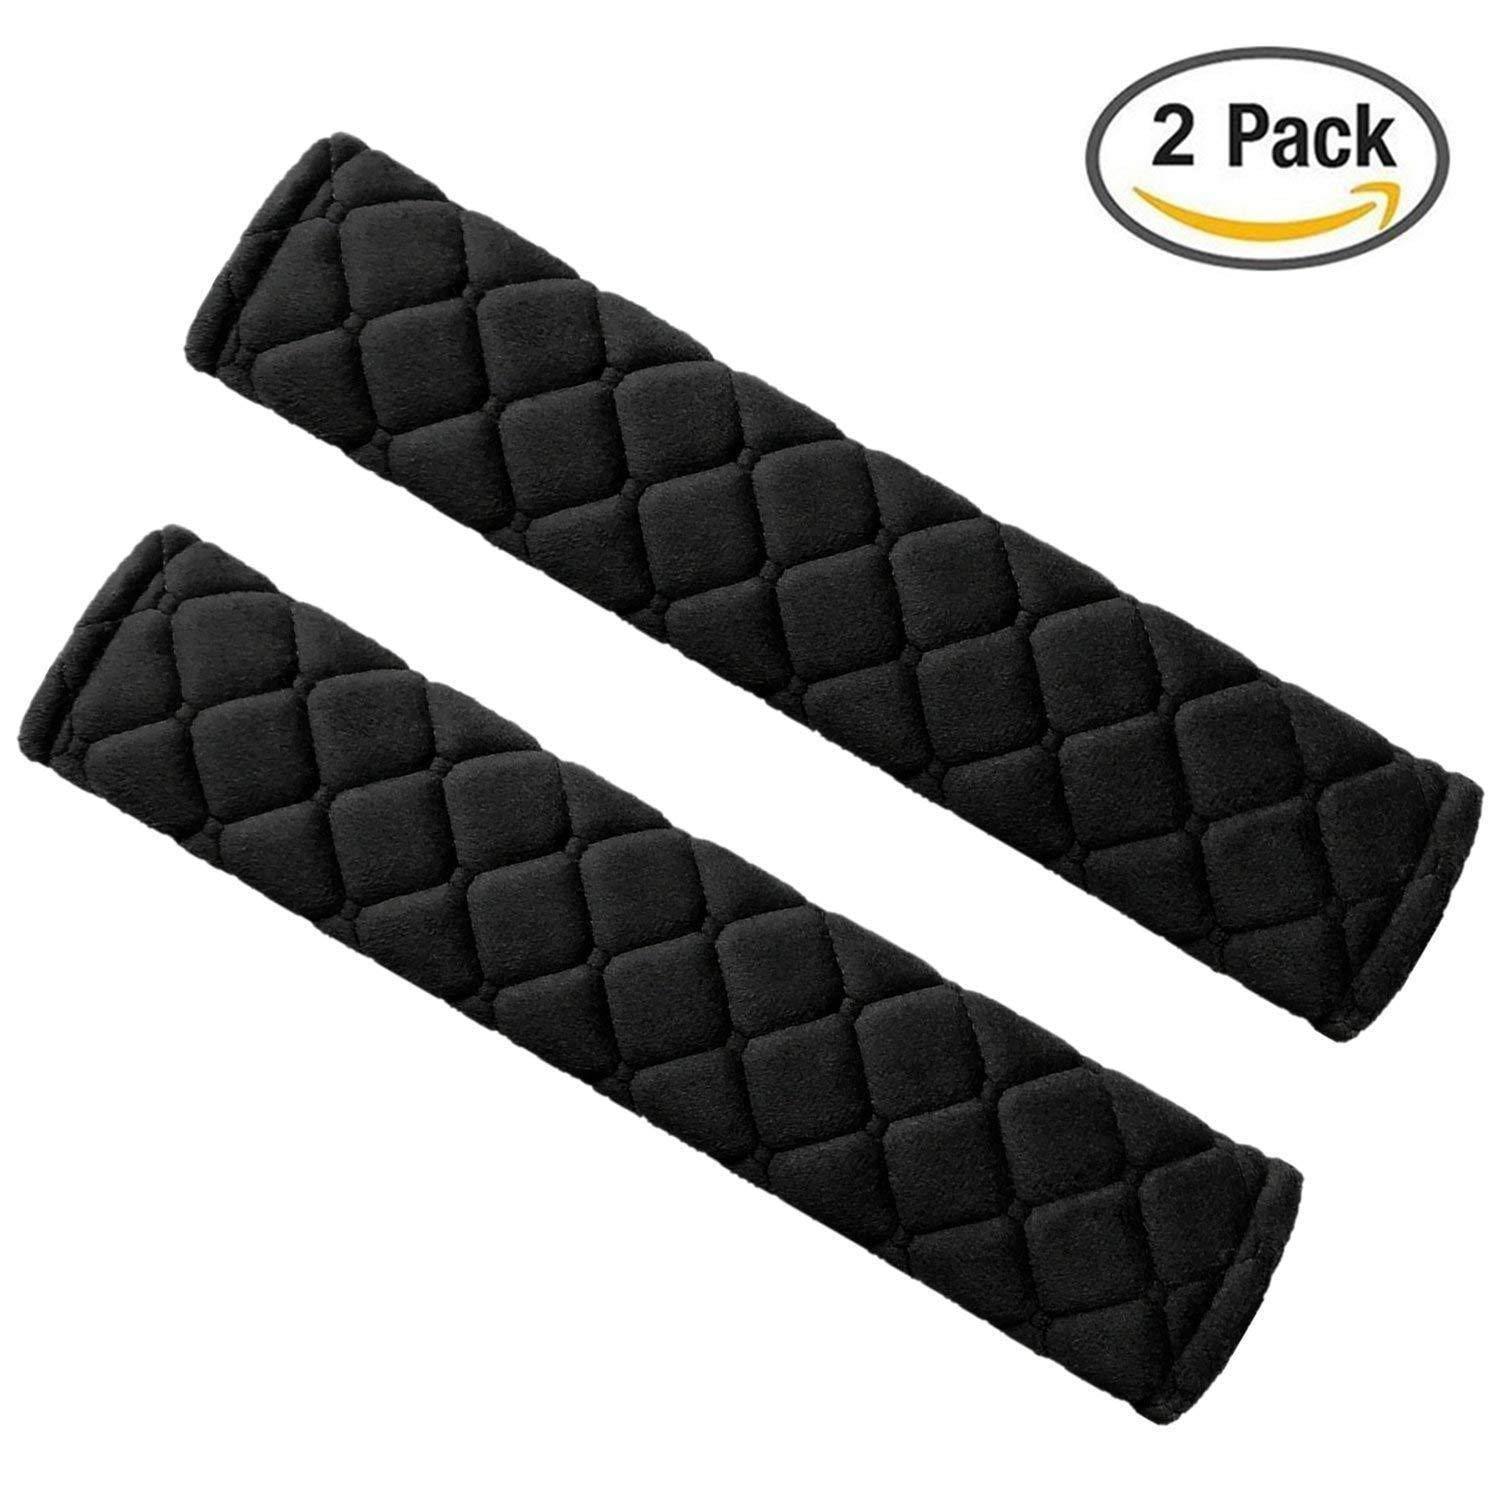 1 Pair Seat Belt Breathable Fabric Shoulder Covers Harness Pads for Car/Bag 